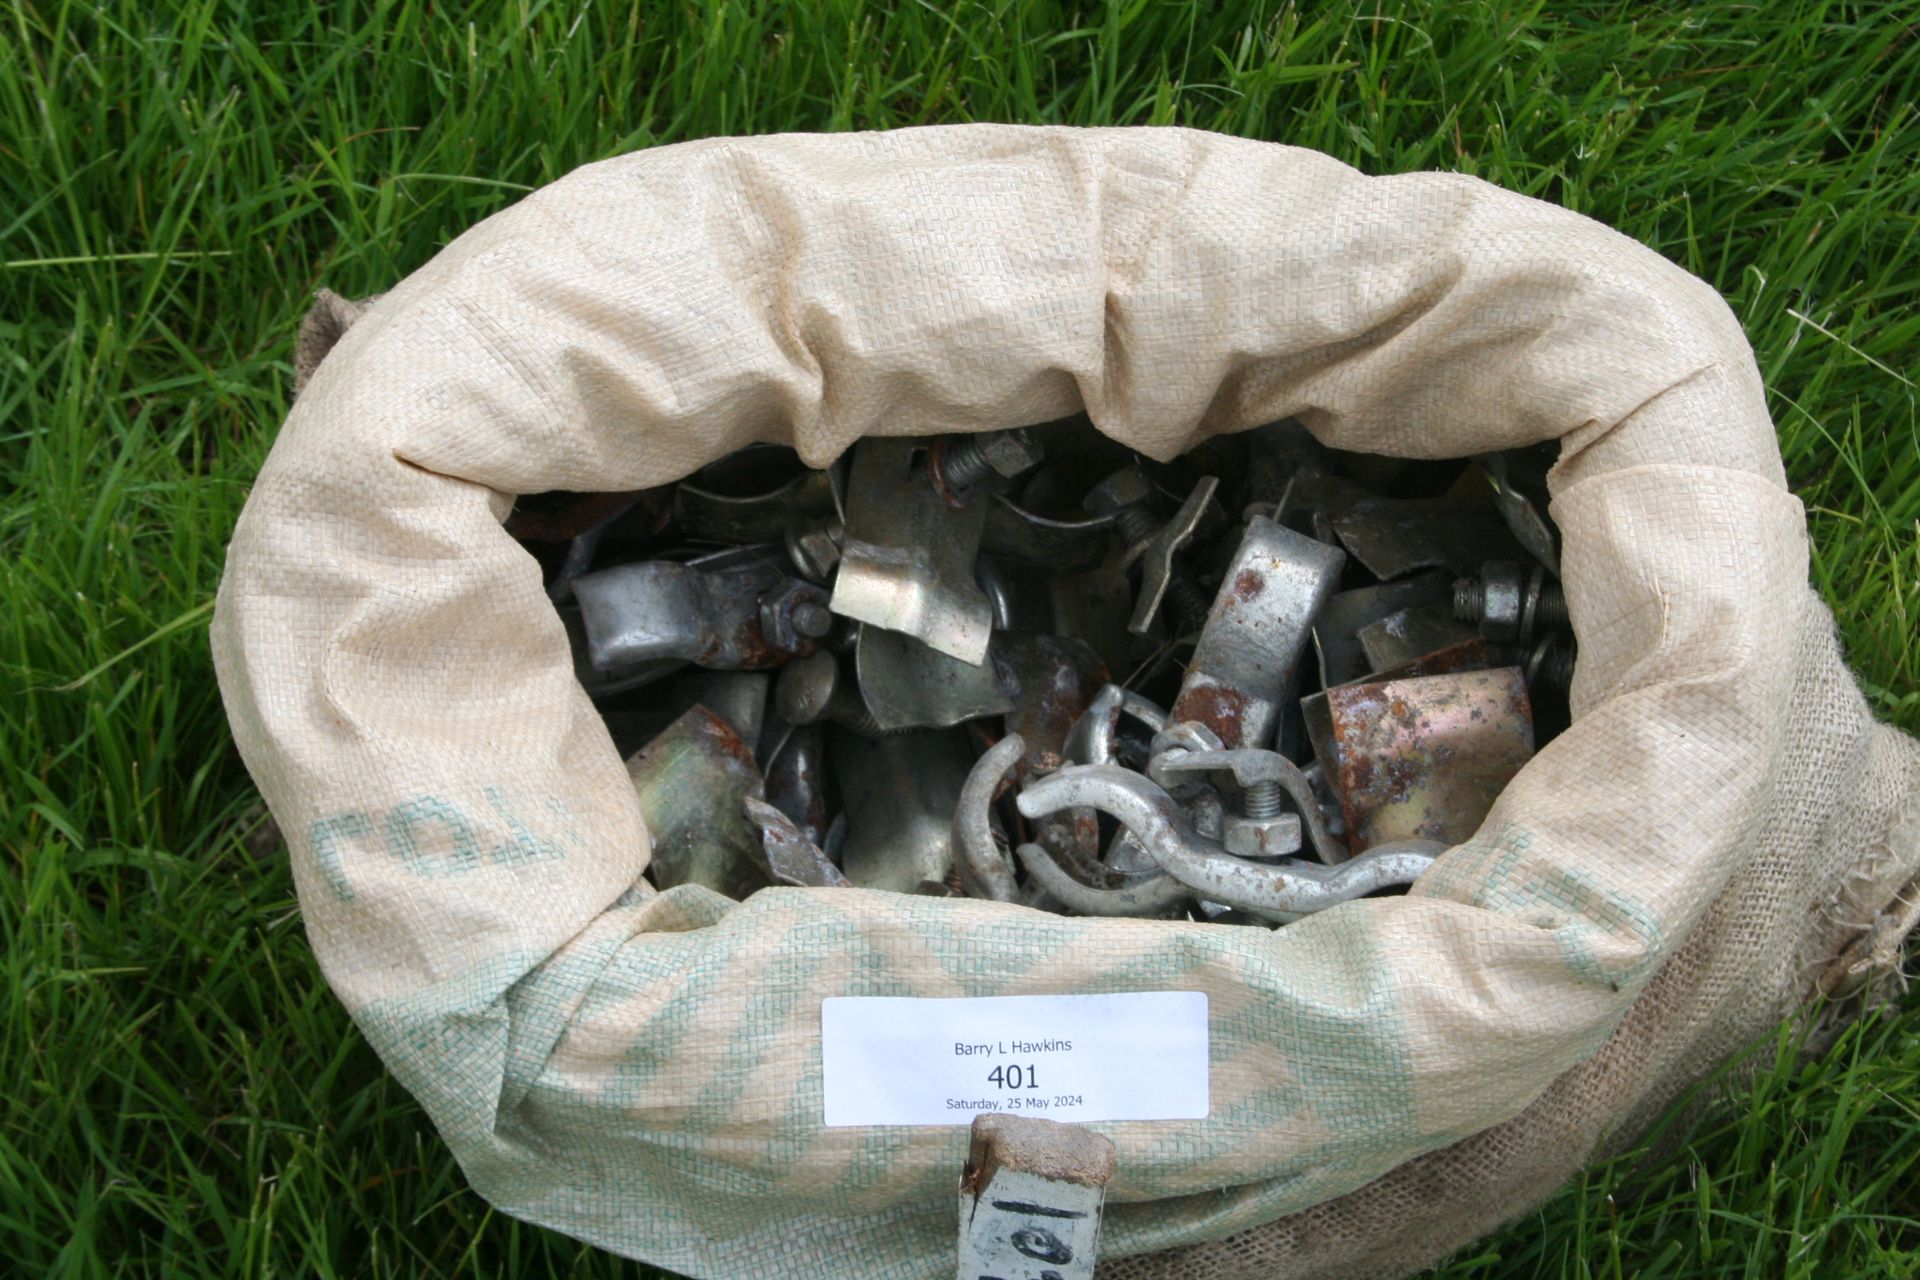 Quantity of harris fencing clips